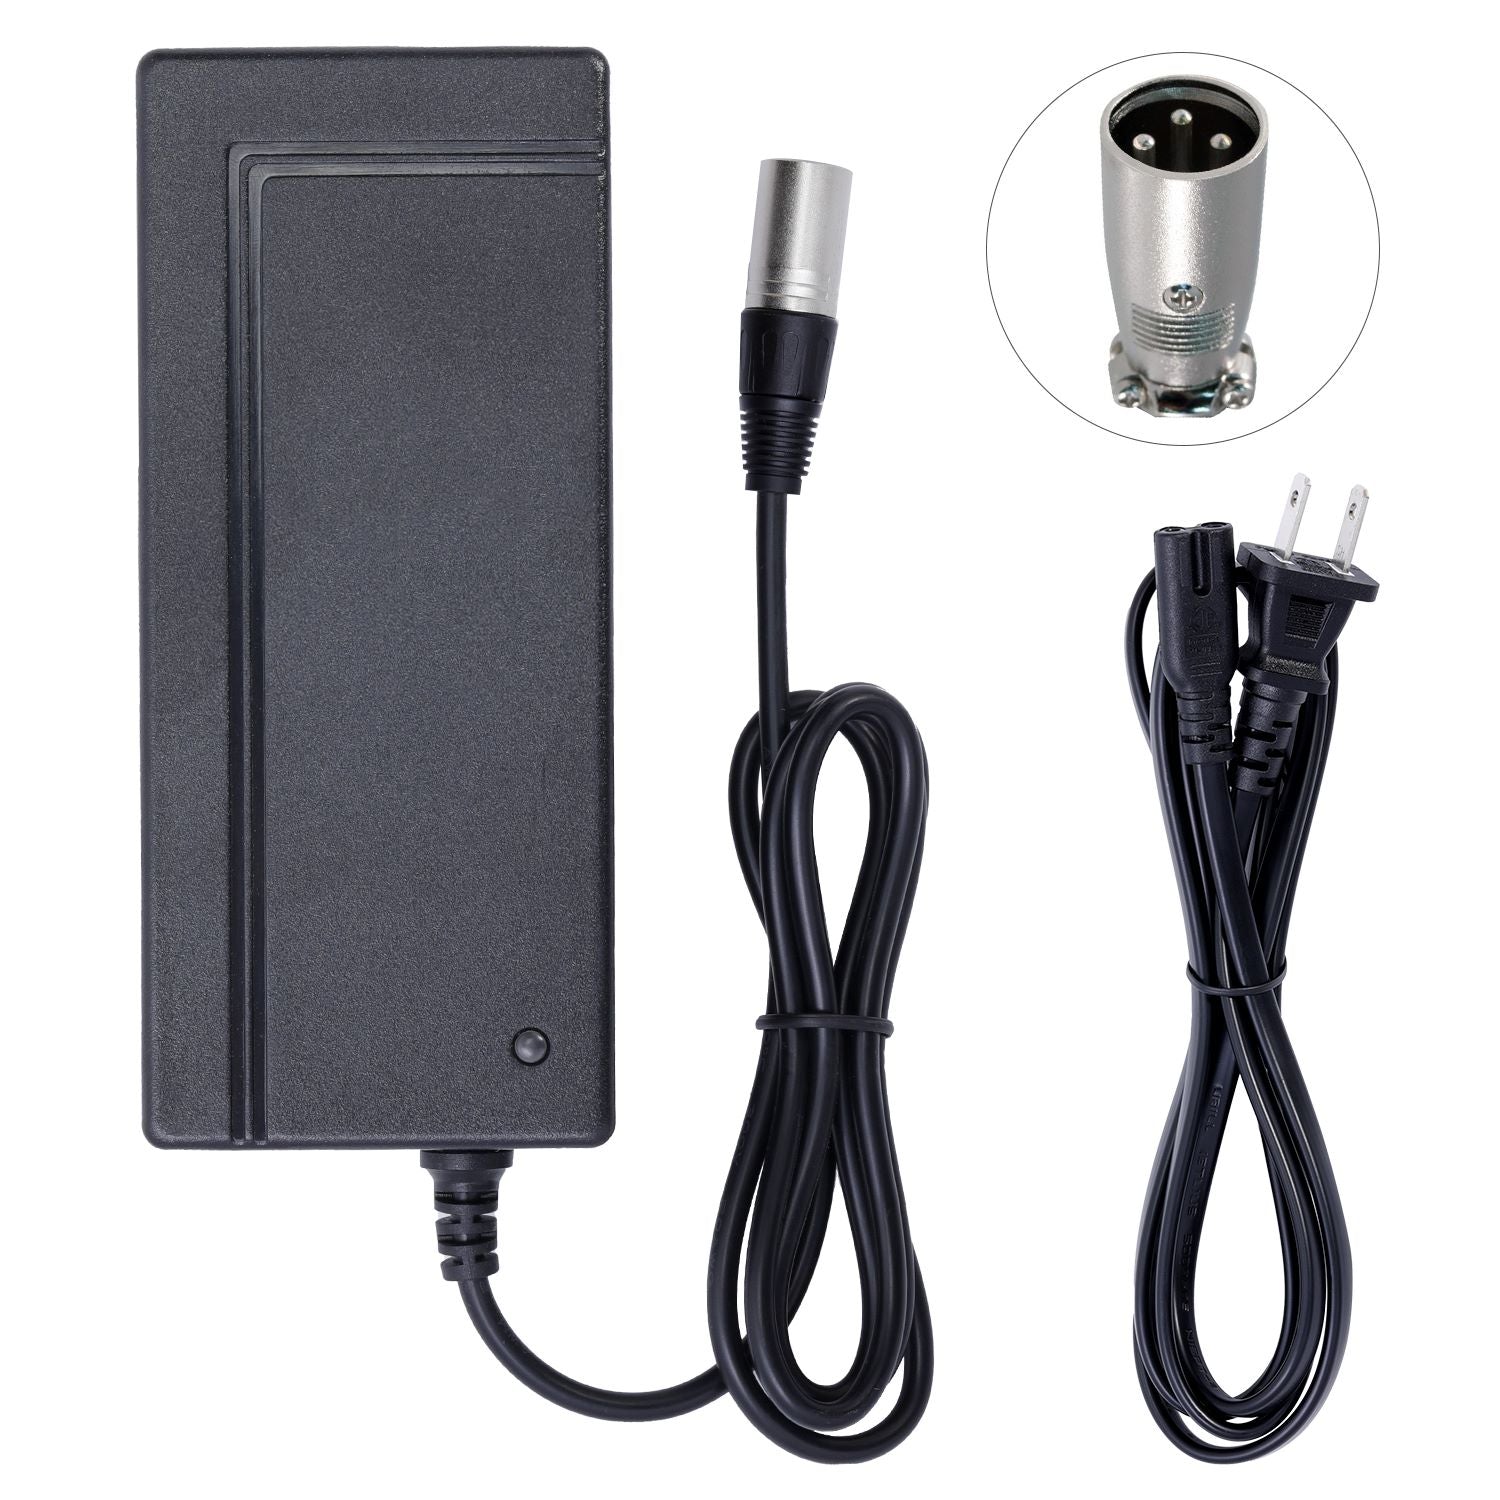 24V 2A UL Certified Charger for FreeRider Mini Ranger Mobility Scooter